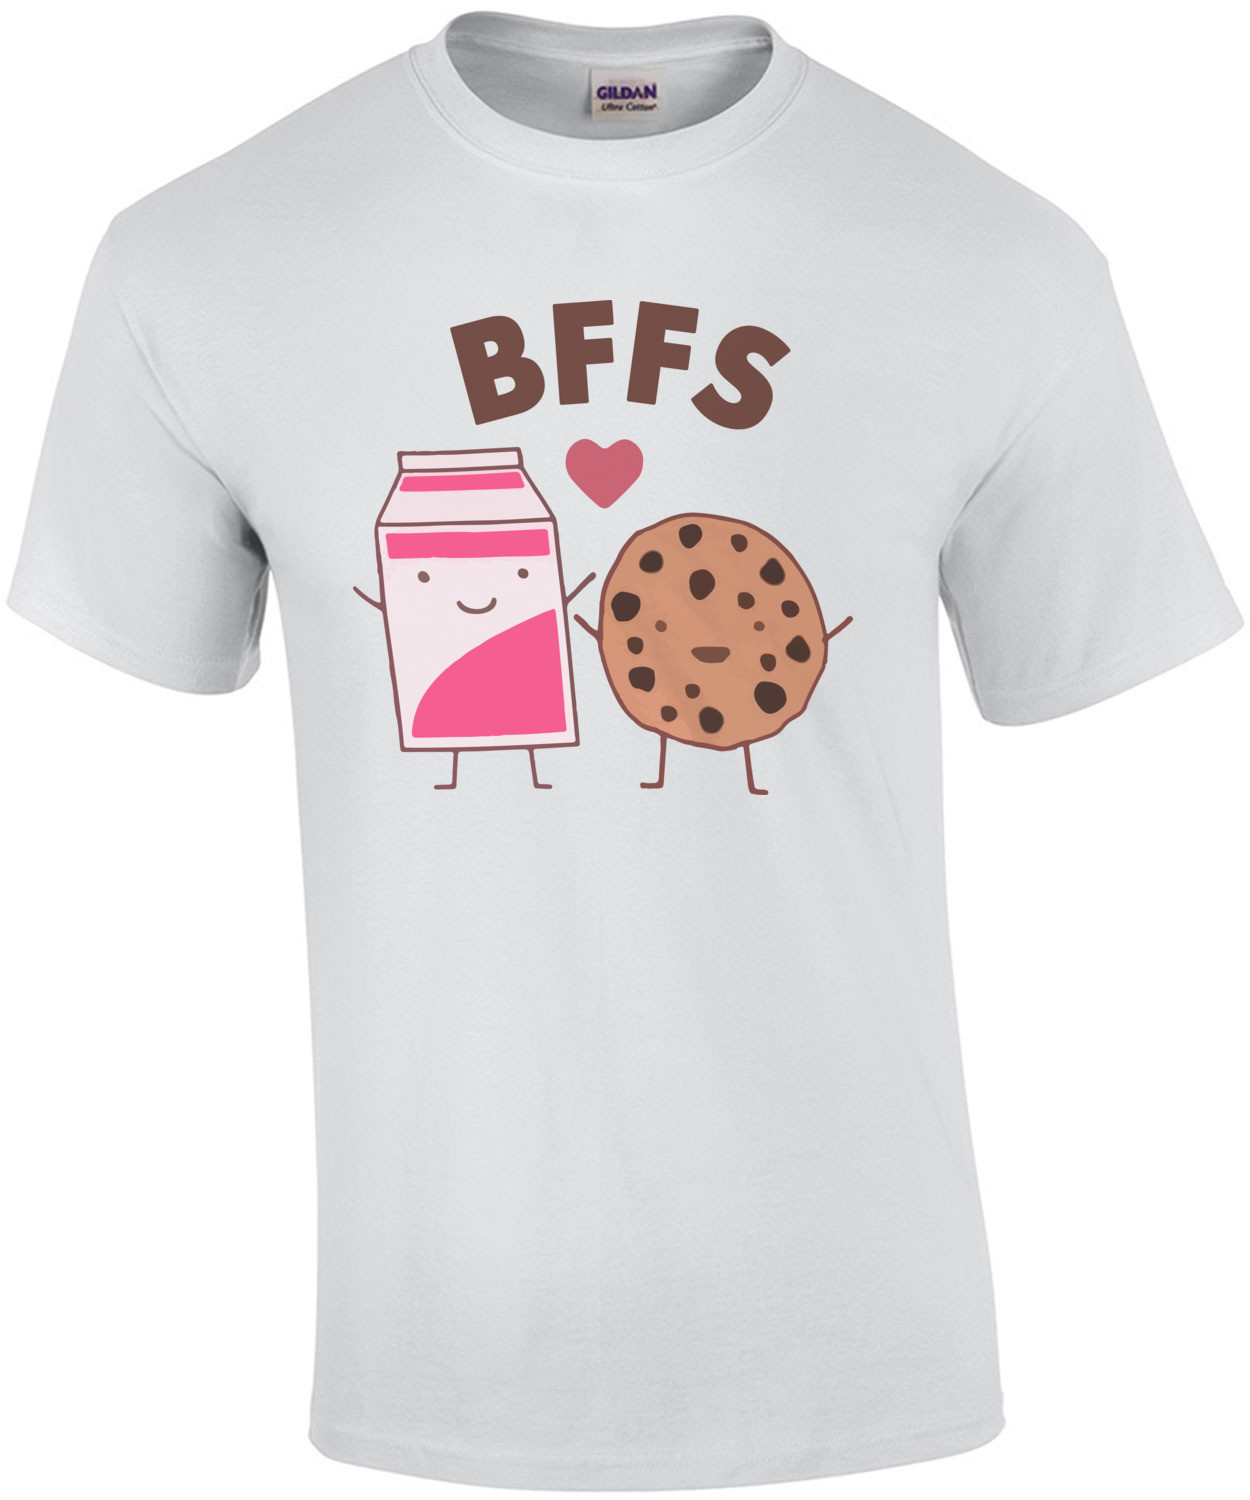 Best Friends - Cookies and Milk Funny